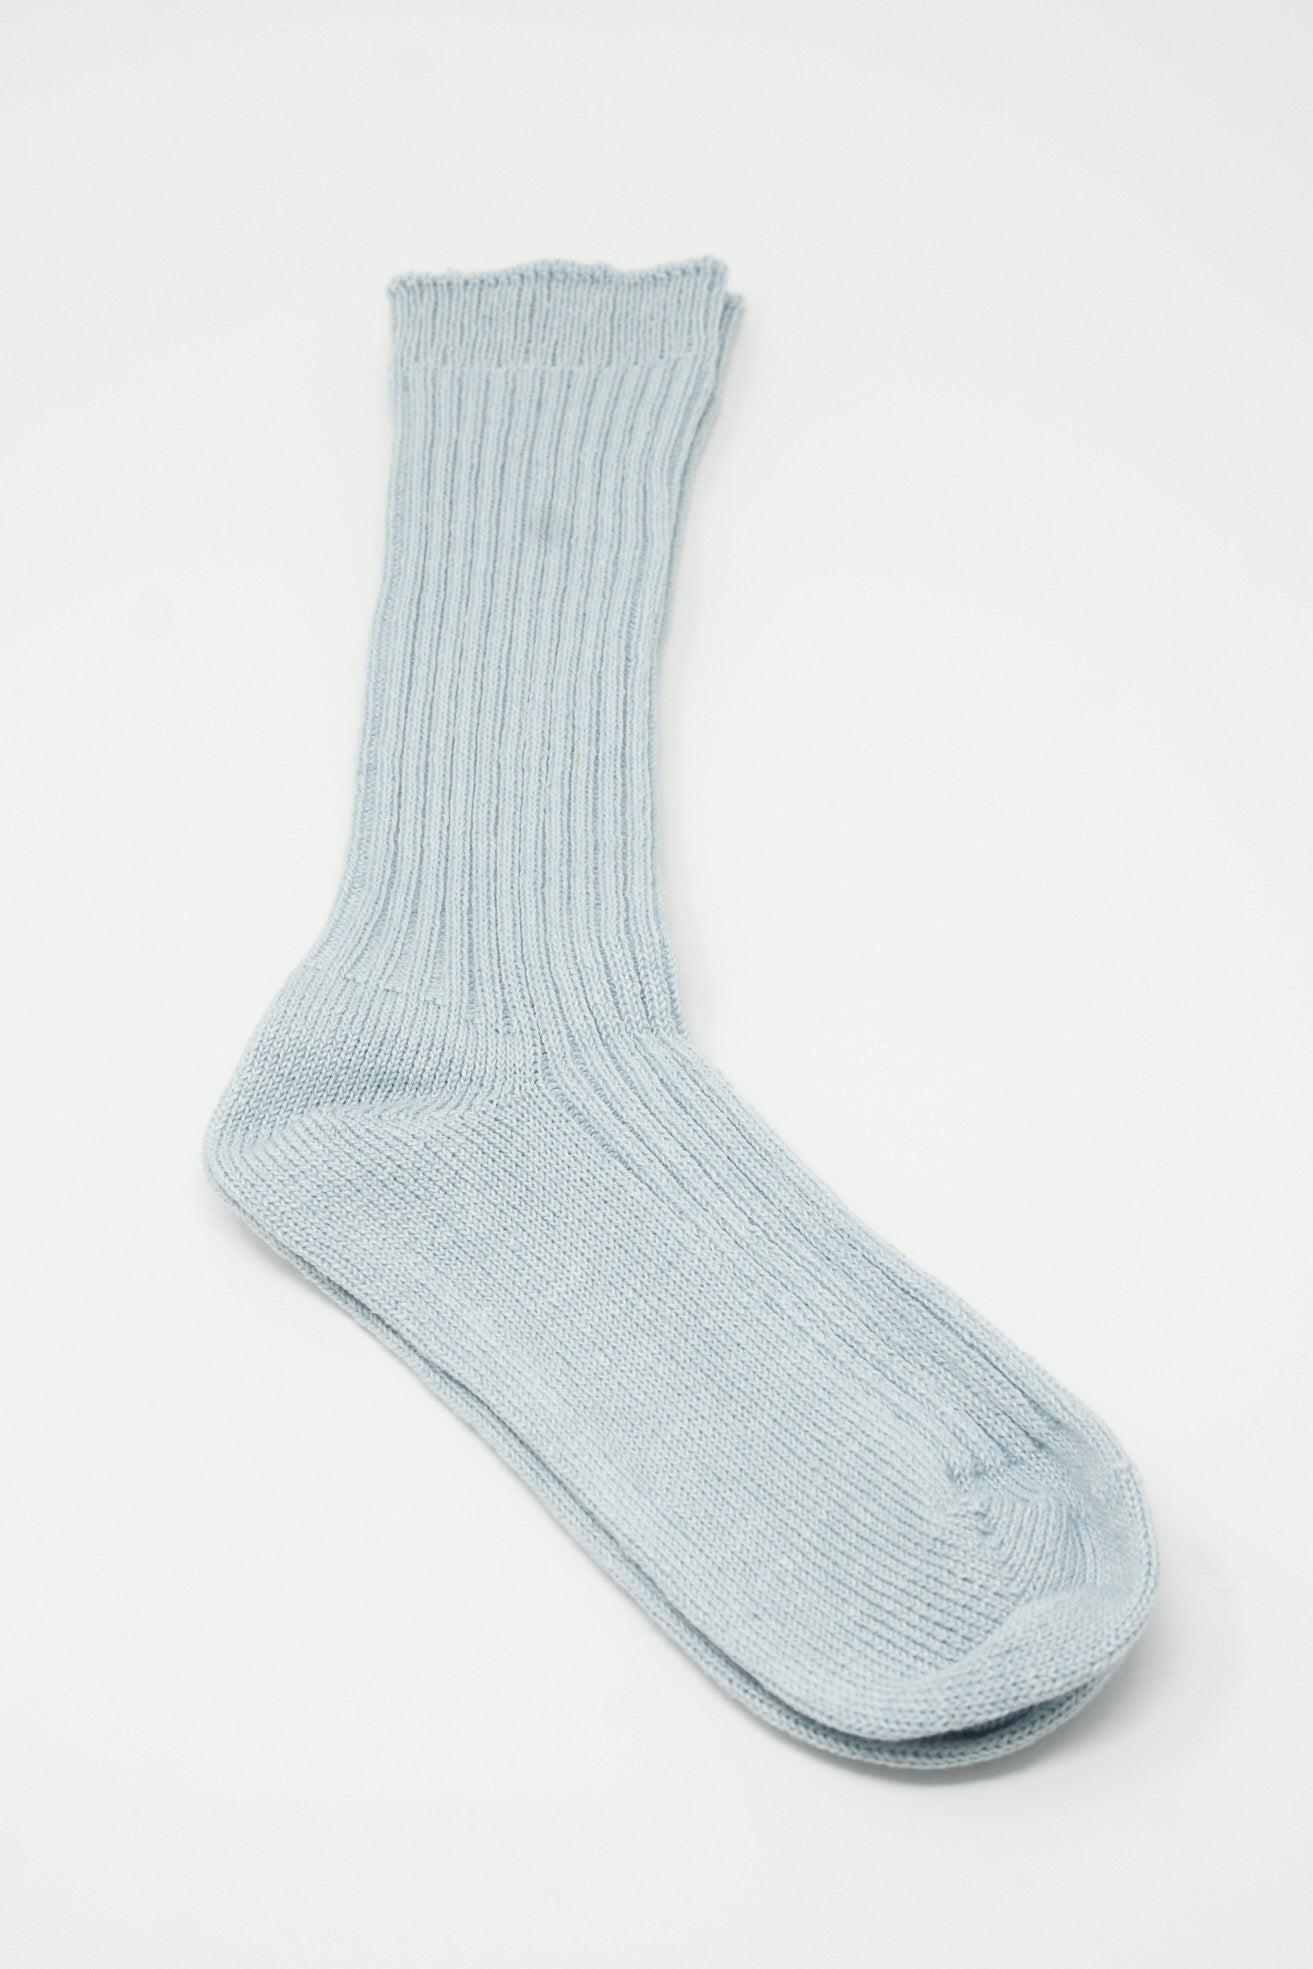 A pair of Linen Rib Socks in Light Blue by Ichi Antiquités on a white surface.